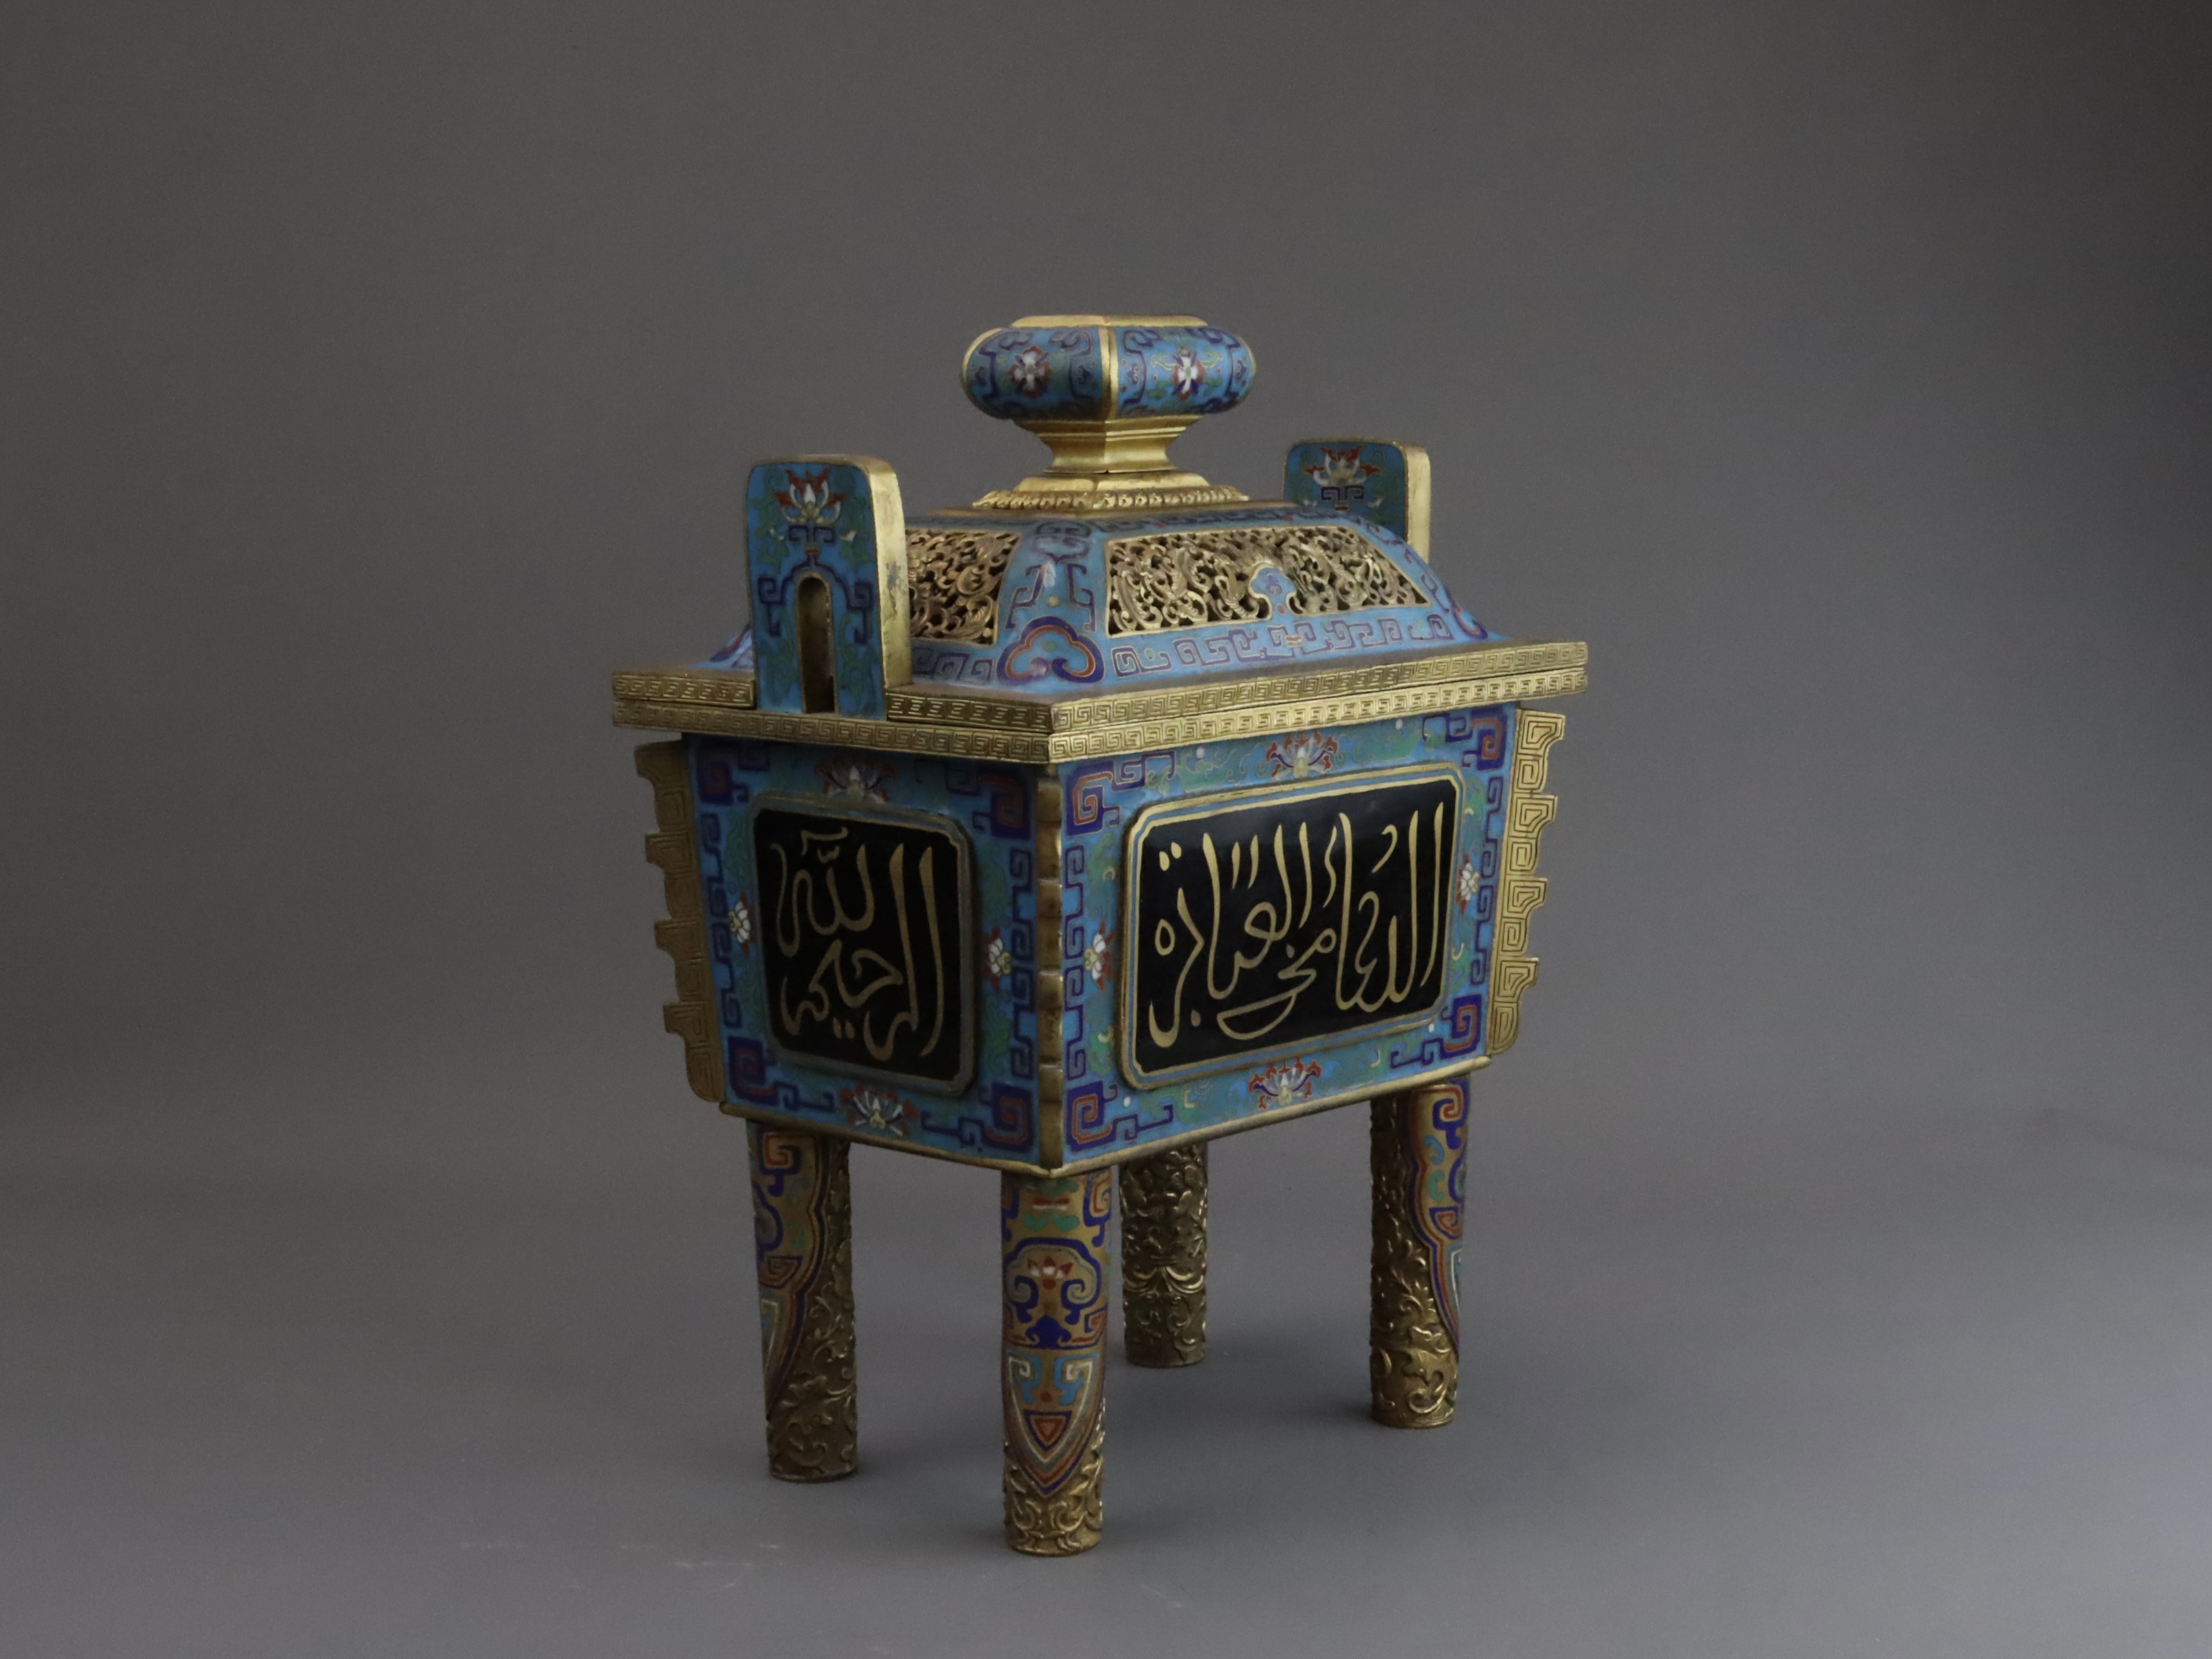 An Arabic Inscribed Cloisonne Censer and Cover, fang ding, late Qing dynasty - Image 6 of 9